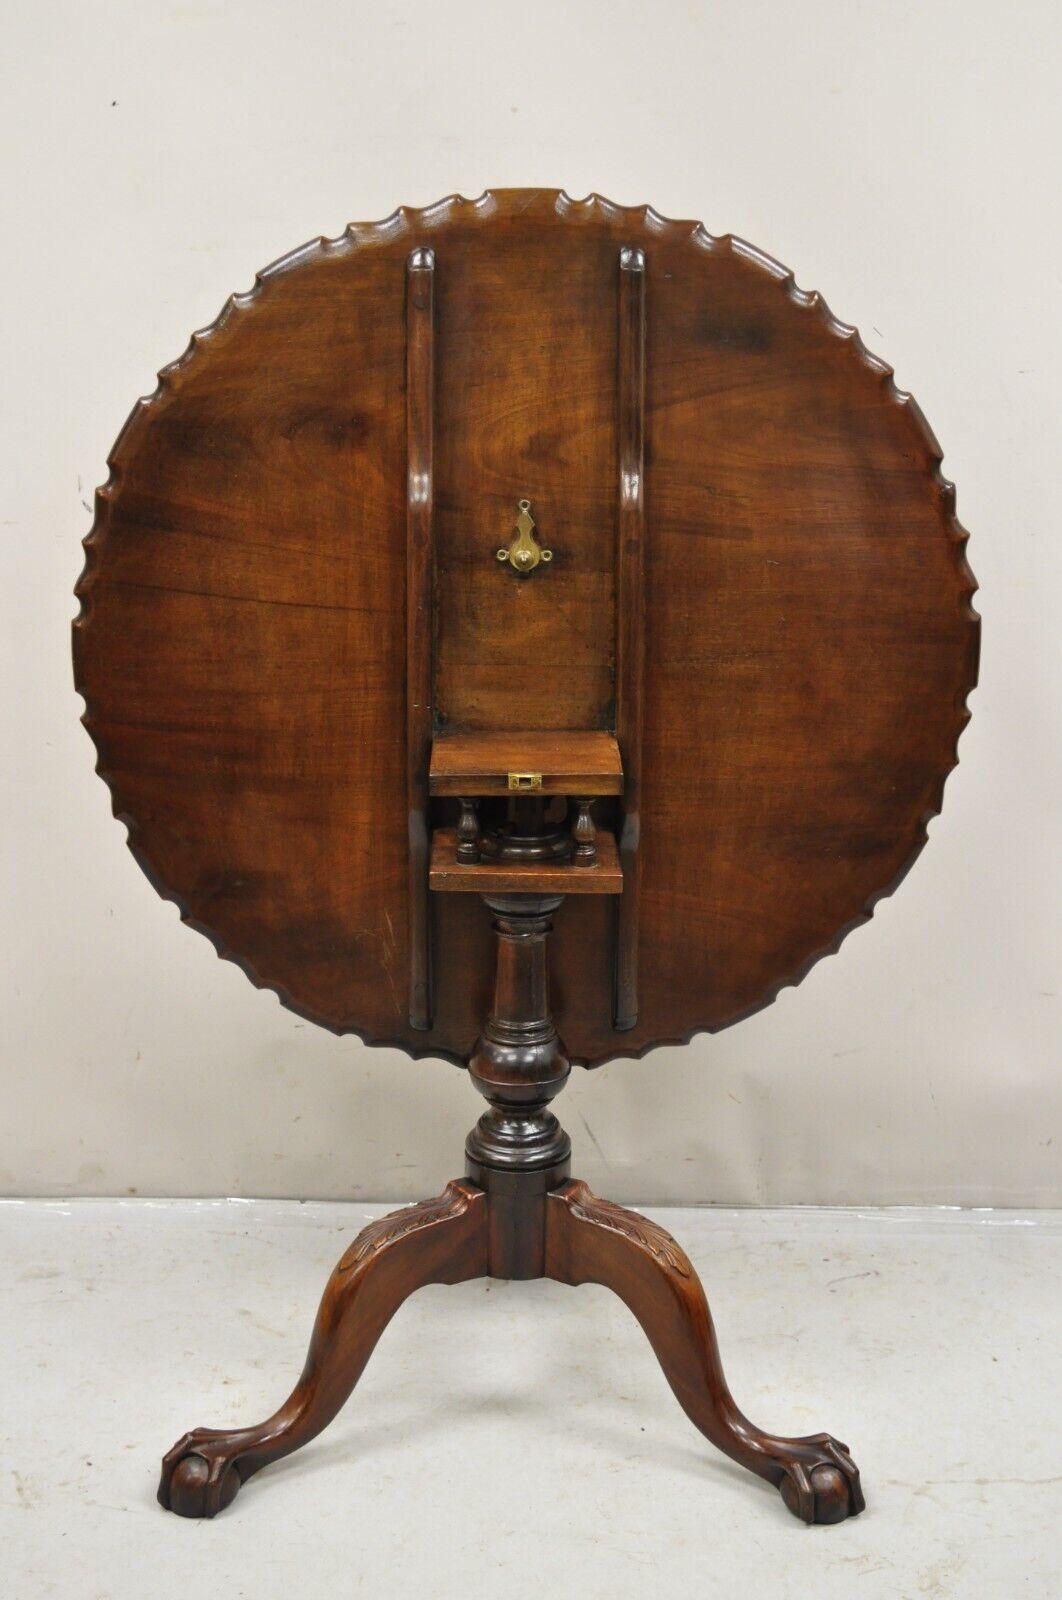 Antique Georgian Chippendale Pie Crust Mahogany Ball and Claw Tilt Top Table. Item features bird cage pedestal base, carved pie crust tilt top, acanthus leaf carved knees, very nice antique item. Circa 19th Century. Measurements: 19